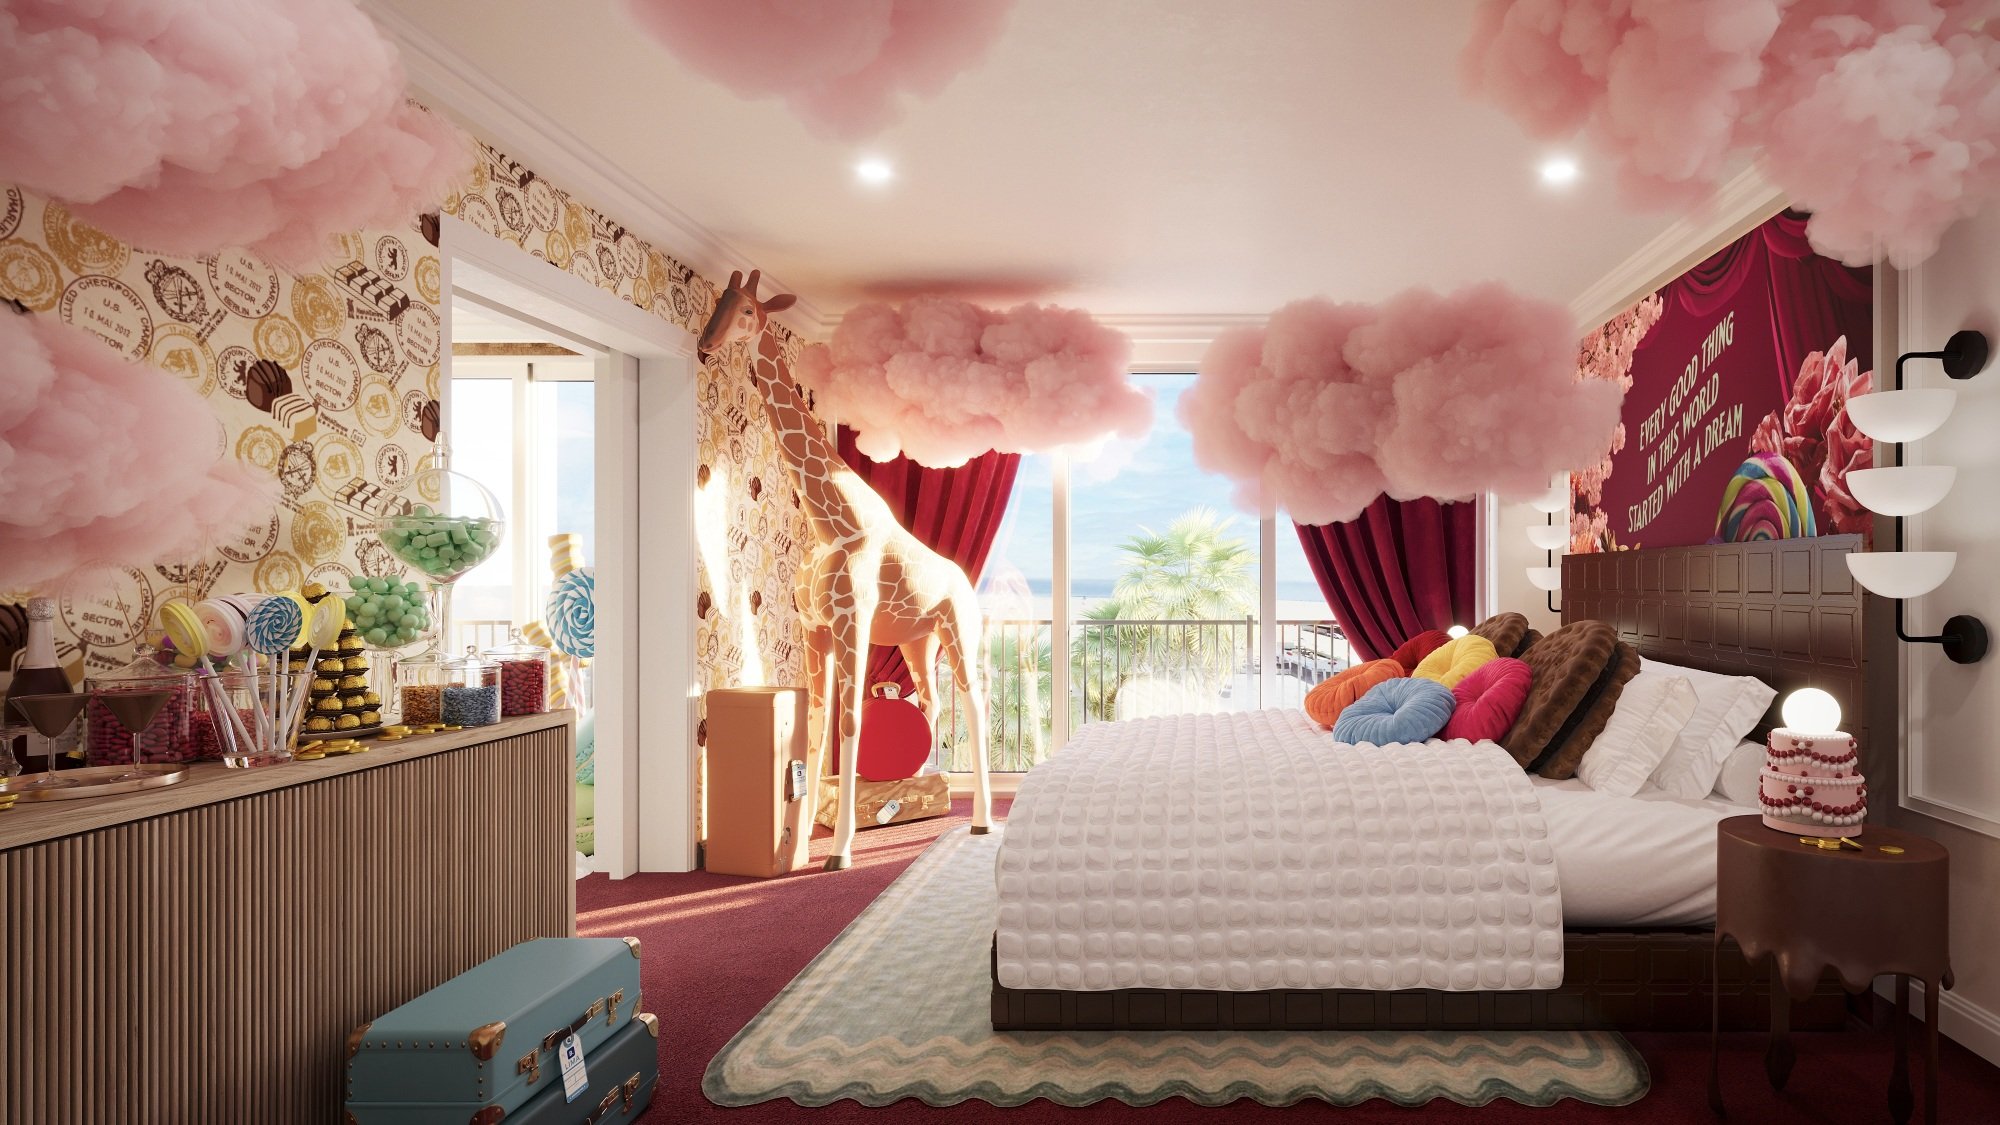 A "Wonka"-themed hotel room, including a bed with a chocolate bar headboard and cotton candy clouds.